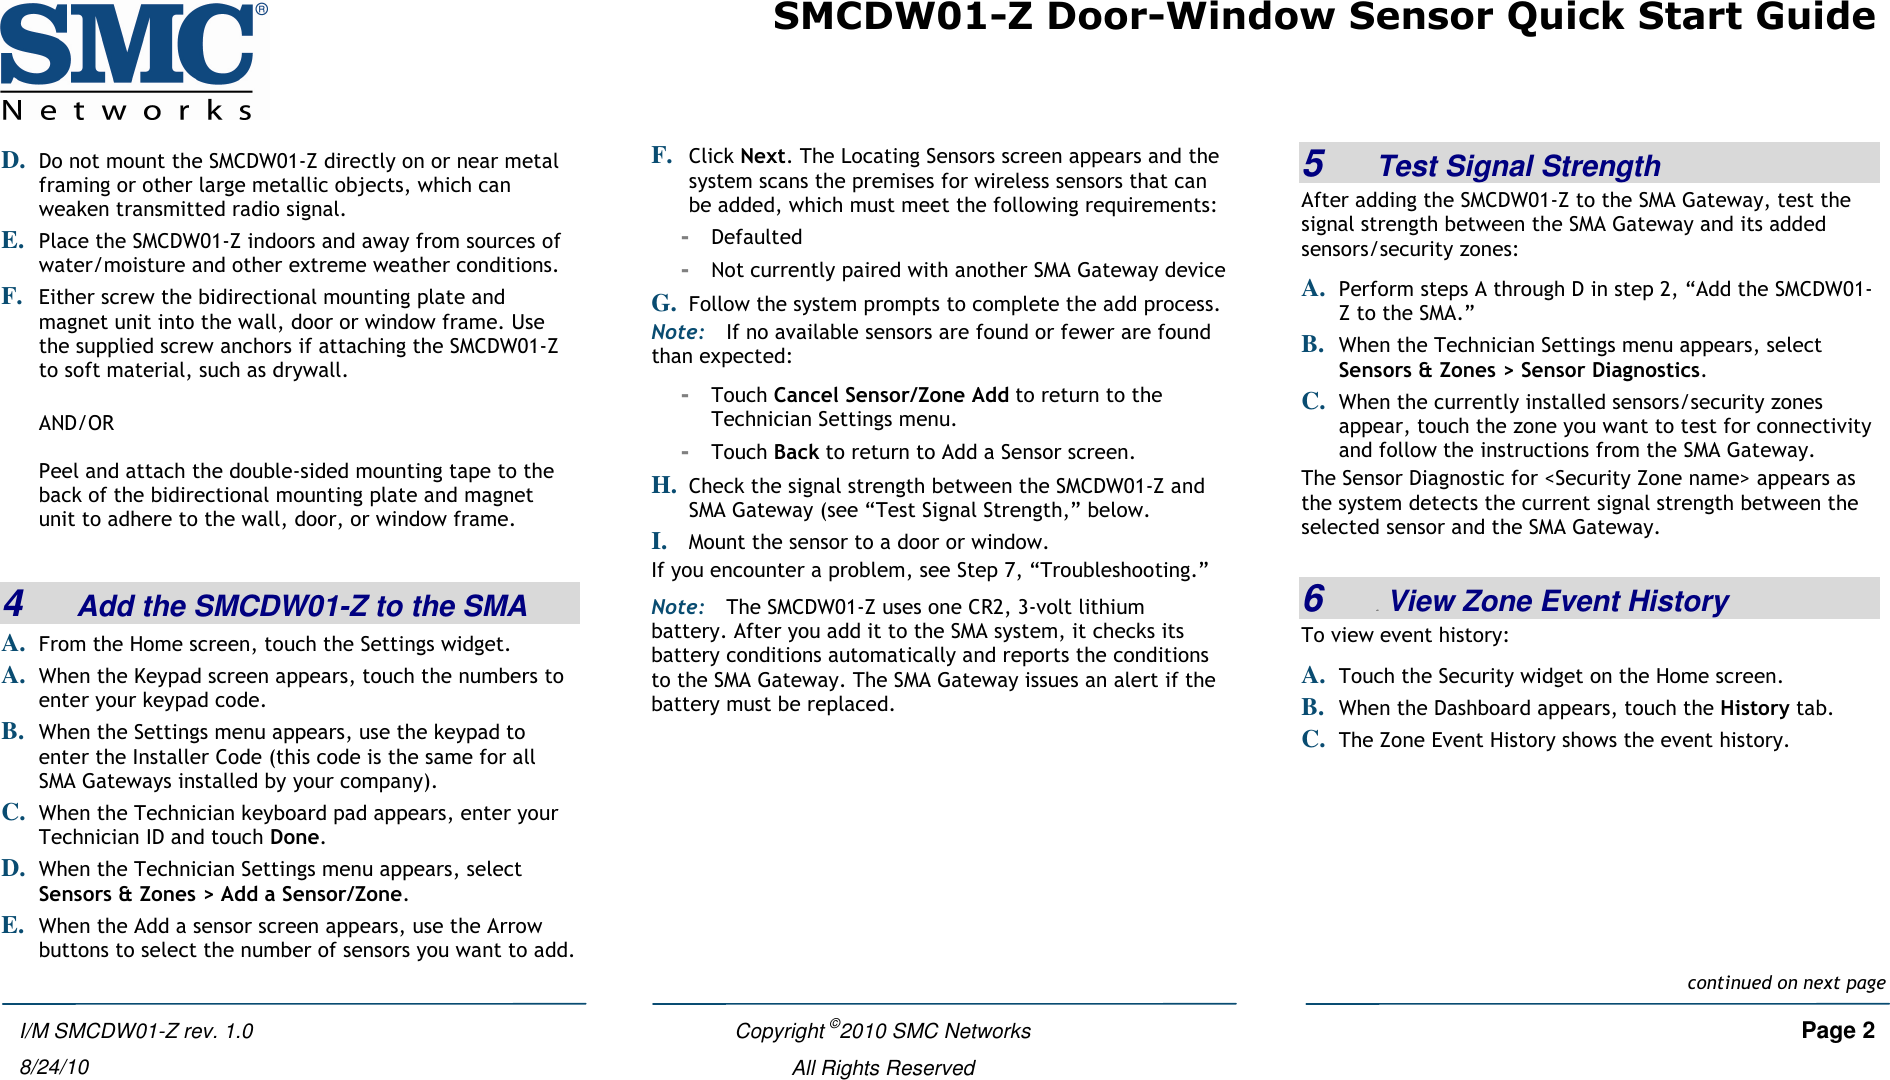 SMCDW01-Z Door-Window Sensor Quick Start Guide   Copyright ©2010 SMC Networks     Page 2  All Rights Reserved  I/M SMCDW01-Z rev. 1.0 8/24/10 D. Do not mount the SMCDW01-Z directly on or near metal framing or other large metallic objects, which can weaken transmitted radio signal. E. Place the SMCDW01-Z indoors and away from sources of water/moisture and other extreme weather conditions. F. Either screw the bidirectional mounting plate and magnet unit into the wall, door or window frame. Use the supplied screw anchors if attaching the SMCDW01-Z to soft material, such as drywall.  AND/OR  Peel and attach the double-sided mounting tape to the back of the bidirectional mounting plate and magnet unit to adhere to the wall, door, or window frame.  4   Add the SMCDW01-Z to the SMA A. From the Home screen, touch the Settings widget. A. When the Keypad screen appears, touch the numbers to enter your keypad code. B. When the Settings menu appears, use the keypad to enter the Installer Code (this code is the same for all SMA Gateways installed by your company). C. When the Technician keyboard pad appears, enter your Technician ID and touch Done. D. When the Technician Settings menu appears, select Sensors &amp; Zones &gt; Add a Sensor/Zone. E. When the Add a sensor screen appears, use the Arrow buttons to select the number of sensors you want to add. F. Click Next. The Locating Sensors screen appears and the system scans the premises for wireless sensors that can be added, which must meet the following requirements: - Defaulted - Not currently paired with another SMA Gateway device G. Follow the system prompts to complete the add process. Note: If no available sensors are found or fewer are found than expected: - Touch Cancel Sensor/Zone Add to return to the Technician Settings menu.  - Touch Back to return to Add a Sensor screen. H. Check the signal strength between the SMCDW01-Z and SMA Gateway (see “Test Signal Strength,” below. I. Mount the sensor to a door or window. If you encounter a problem, see Step 7, “Troubleshooting.” Note: The SMCDW01-Z uses one CR2, 3-volt lithium battery. After you add it to the SMA system, it checks its battery conditions automatically and reports the conditions to the SMA Gateway. The SMA Gateway issues an alert if the battery must be replaced.  5   Test Signal Strength After adding the SMCDW01-Z to the SMA Gateway, test the signal strength between the SMA Gateway and its added sensors/security zones: A. Perform steps A through D in step 2, “Add the SMCDW01-Z to the SMA.” B. When the Technician Settings menu appears, select Sensors &amp; Zones &gt; Sensor Diagnostics. C. When the currently installed sensors/security zones appear, touch the zone you want to test for connectivity and follow the instructions from the SMA Gateway. The Sensor Diagnostic for &lt;Security Zone name&gt; appears as the system detects the current signal strength between the selected sensor and the SMA Gateway.  6   4B View Zone Event History To view event history: A. Touch the Security widget on the Home screen. B. When the Dashboard appears, touch the History tab. C. The Zone Event History shows the event history. continued on next pagecontinued on next page